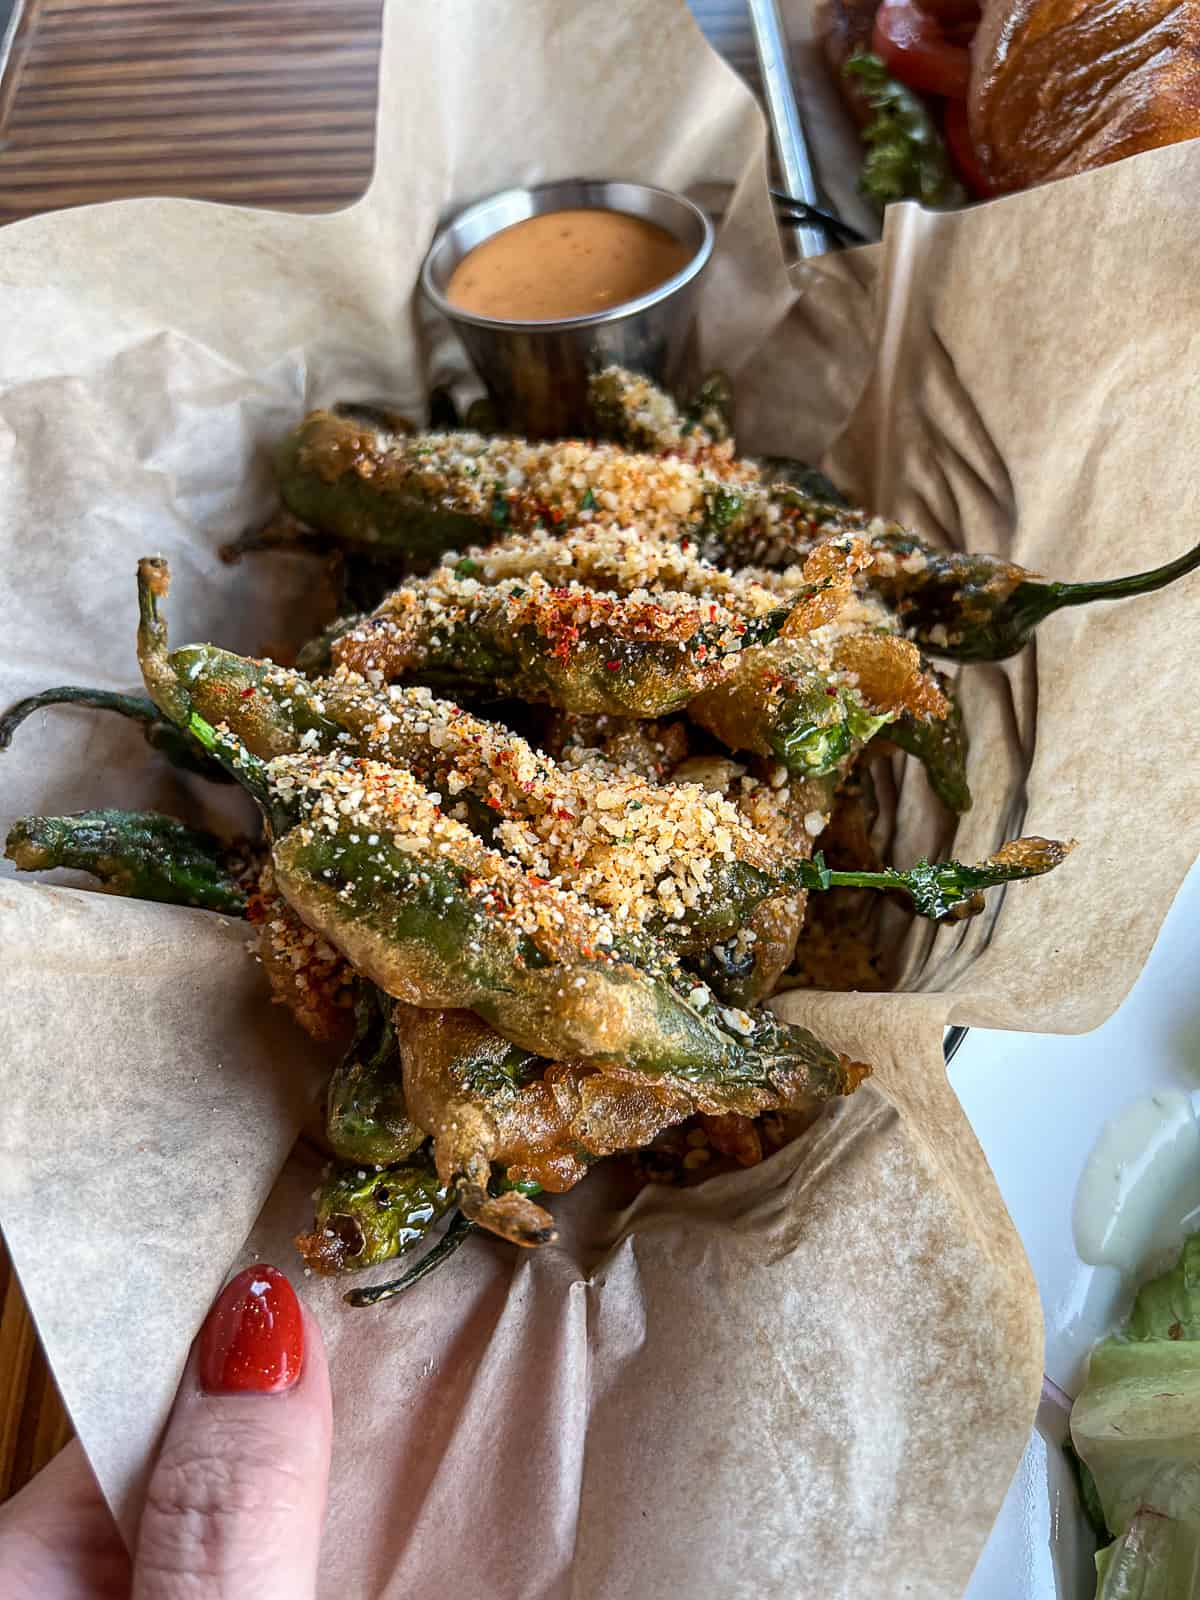 Breaded and fried peppers from the appetizer menu at Revelry on the Boulevard Austin TX